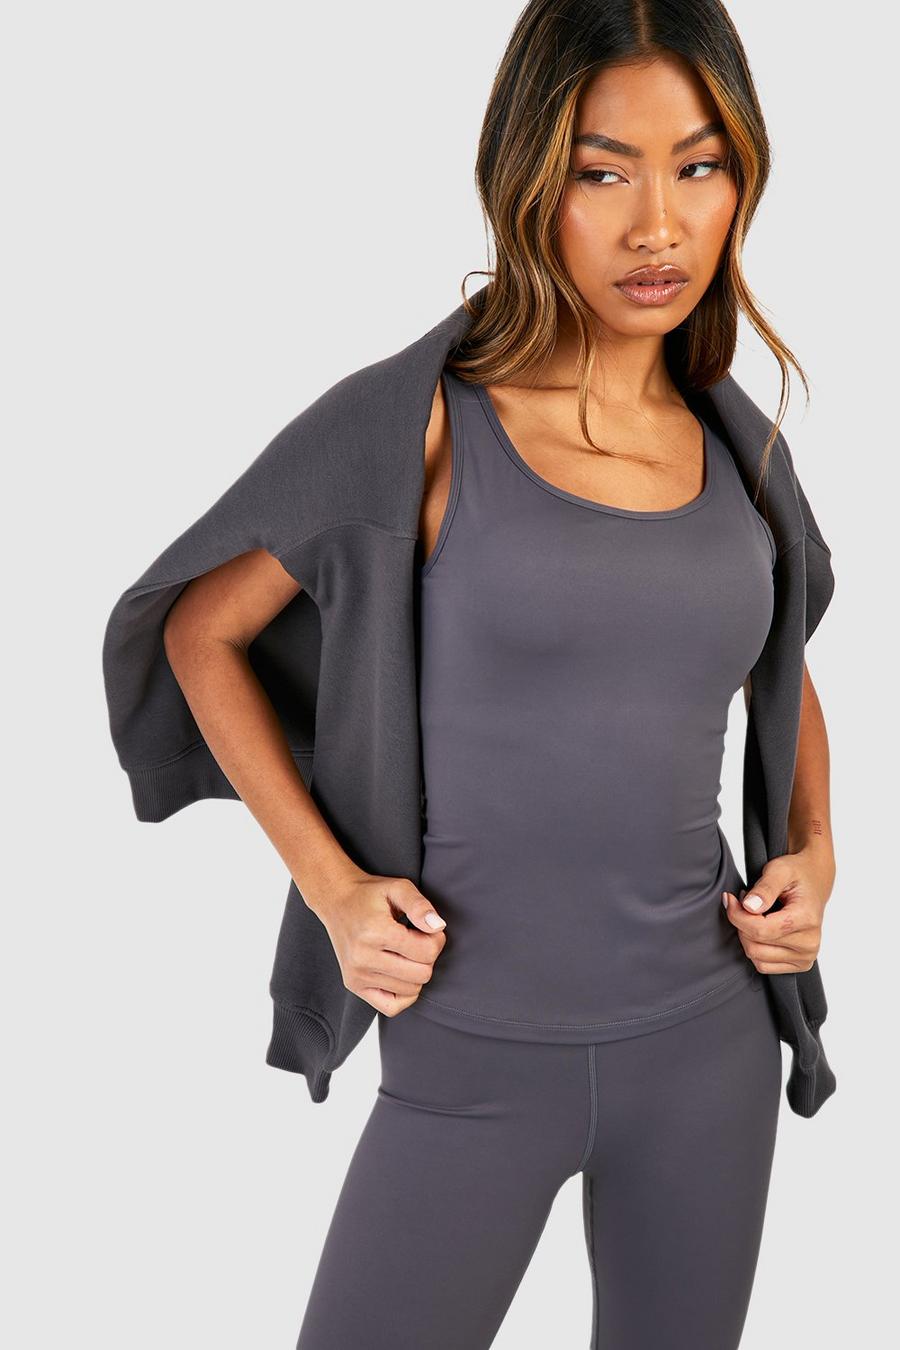 Charcoal DSGN Studio Supersoft Peached Sculpt Padded Vest Top image number 1